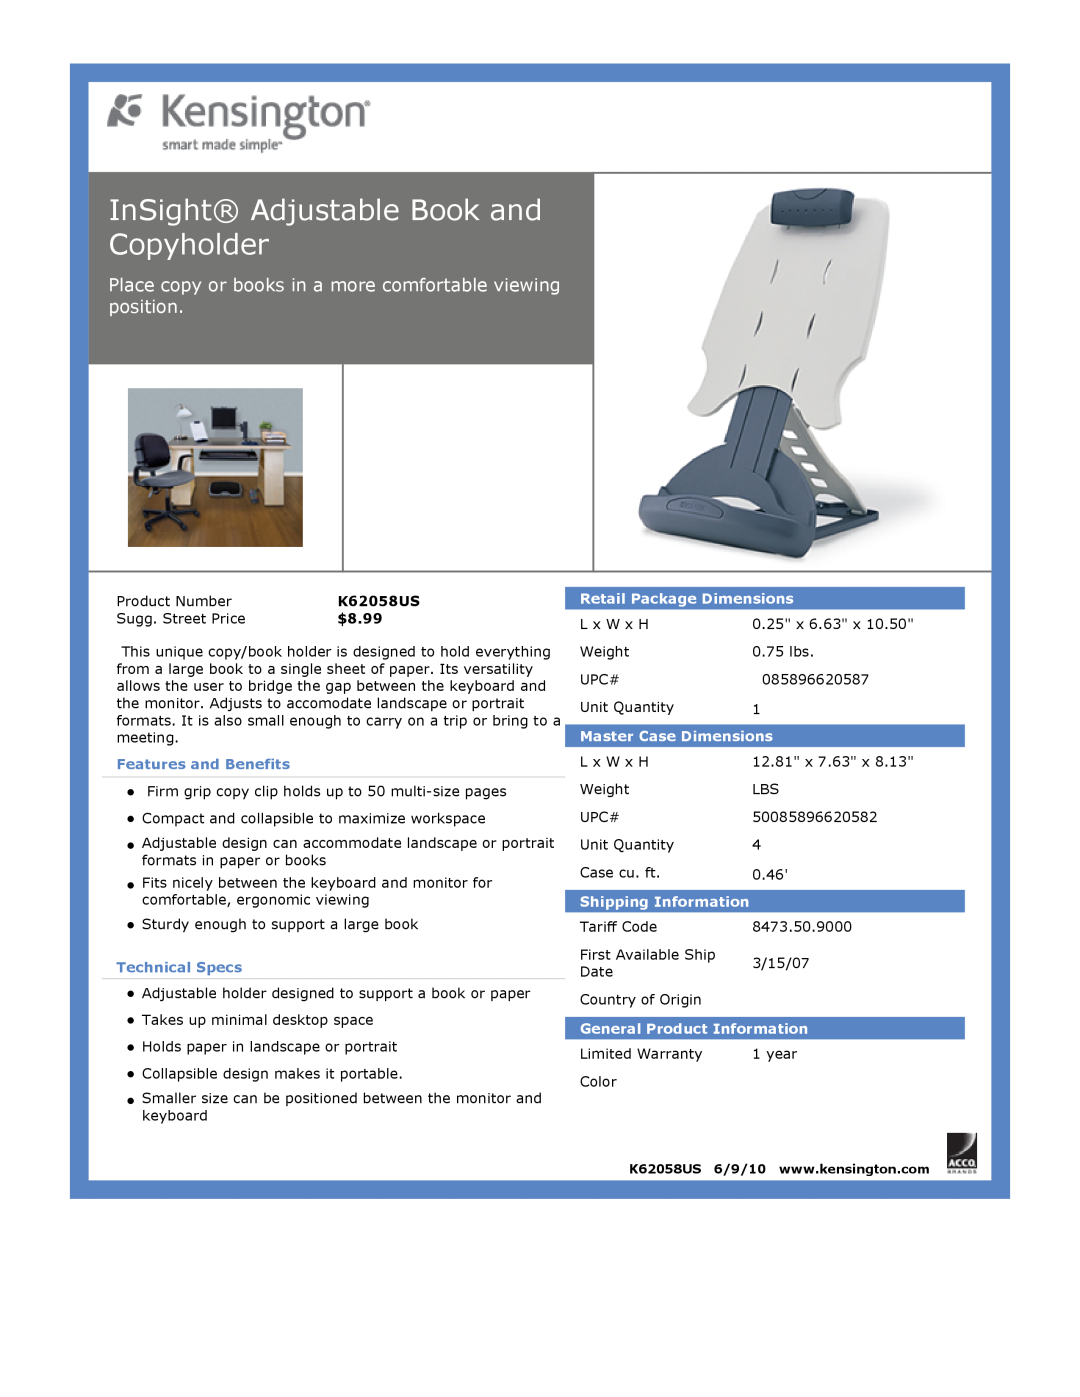 Kensington EU64325 dimensions InSight Adjustable Book and Copyholder, $8.99, Features and Benefits, Technical Specs 